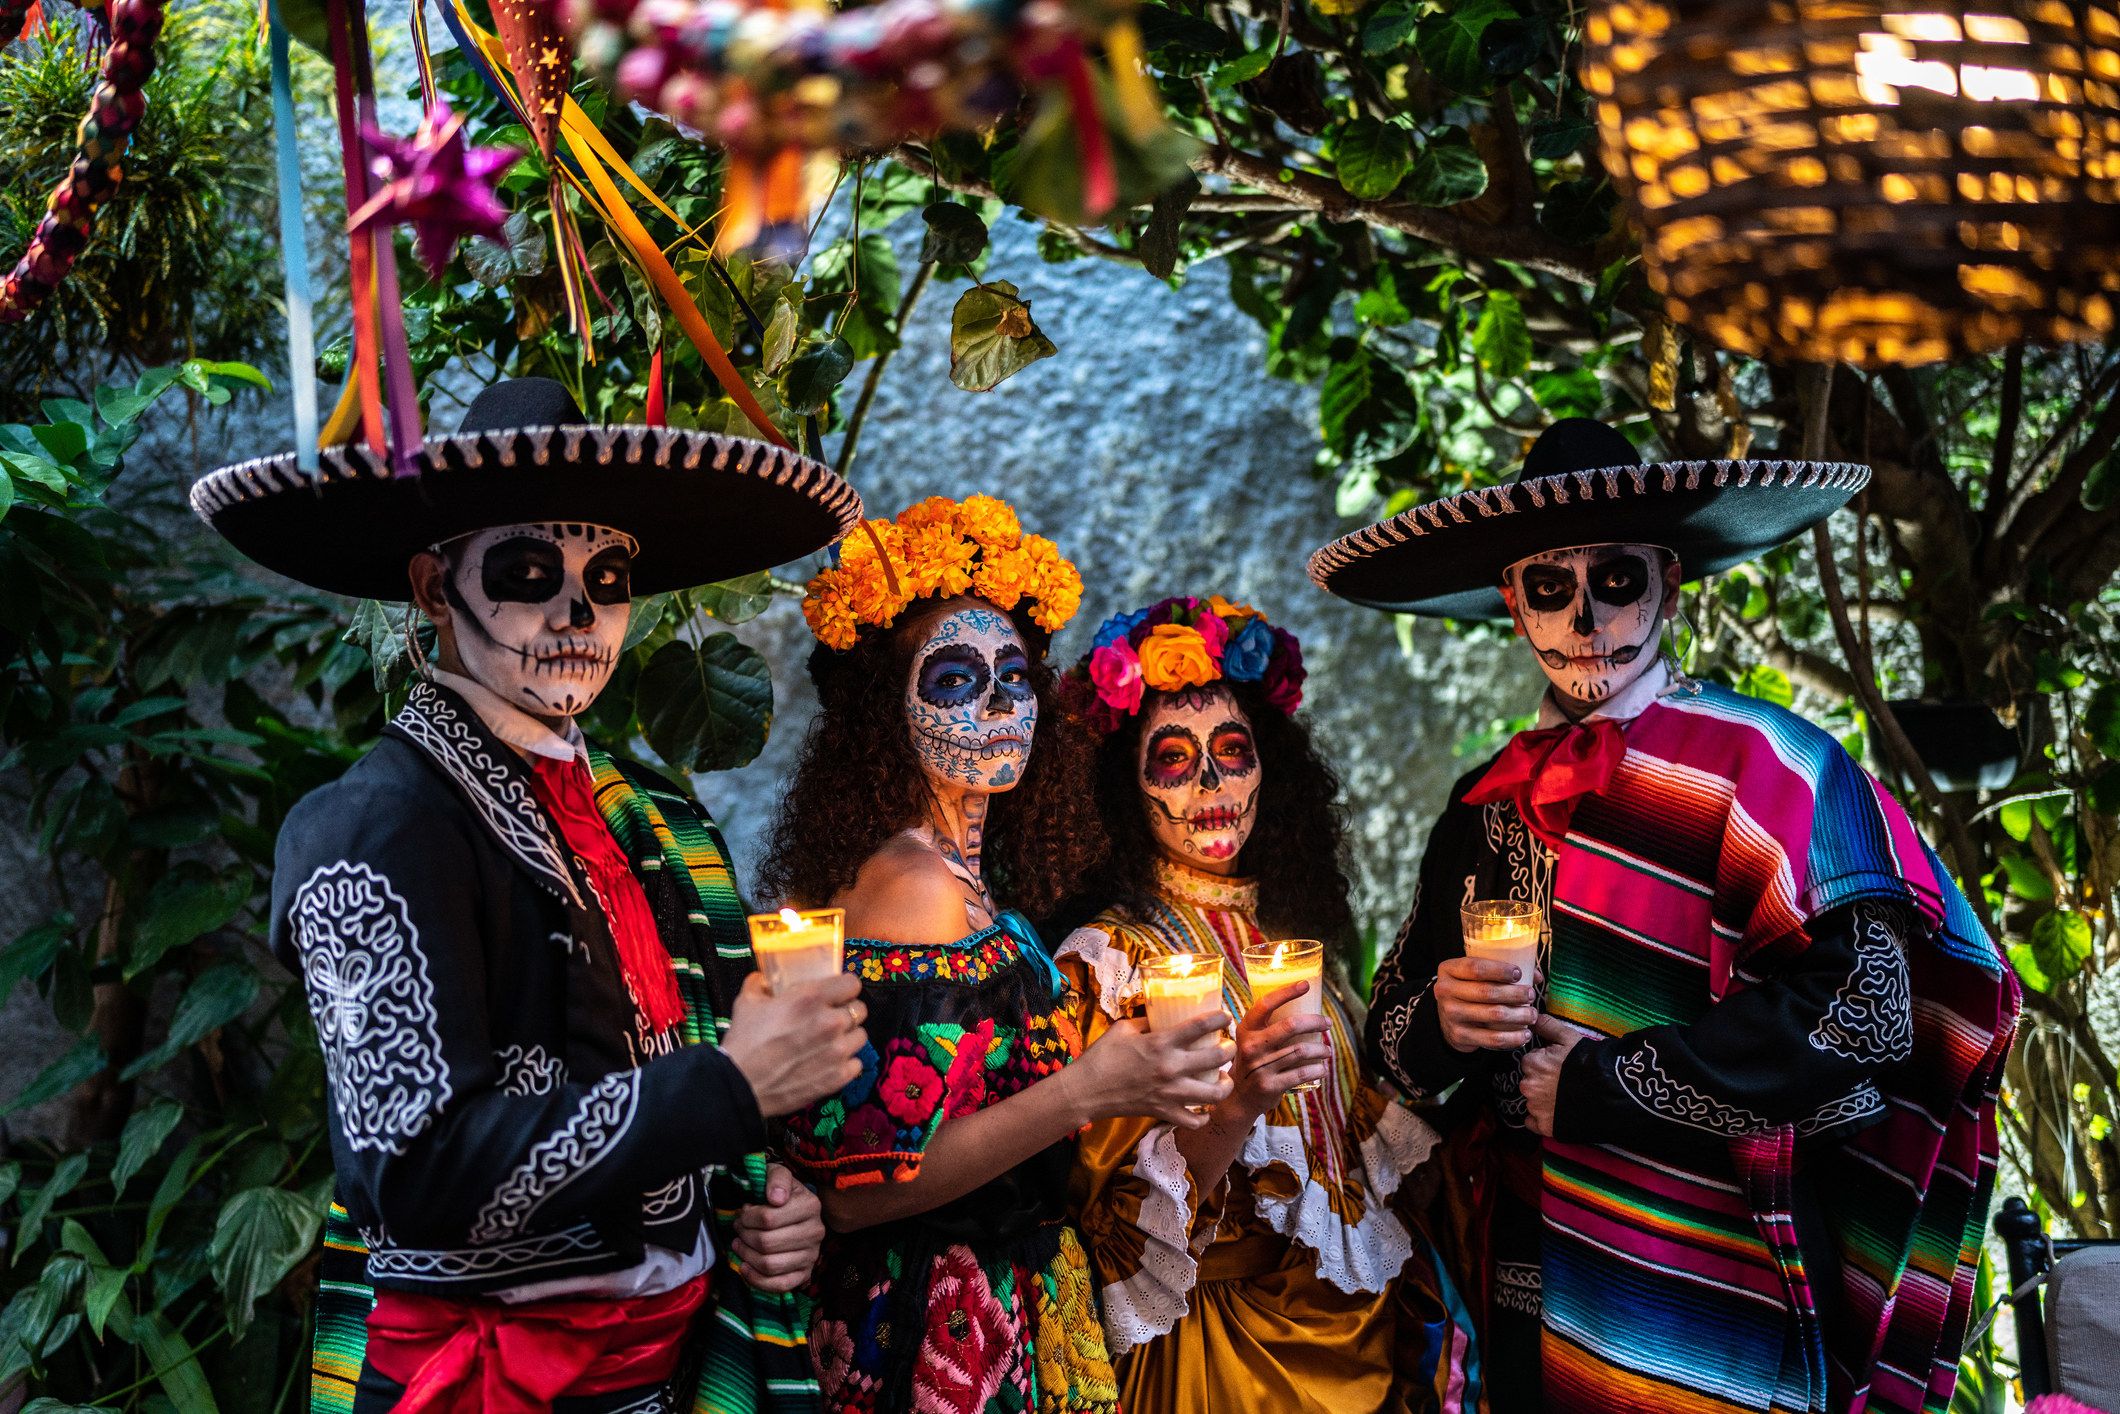 4 people dressed in Mexican attires